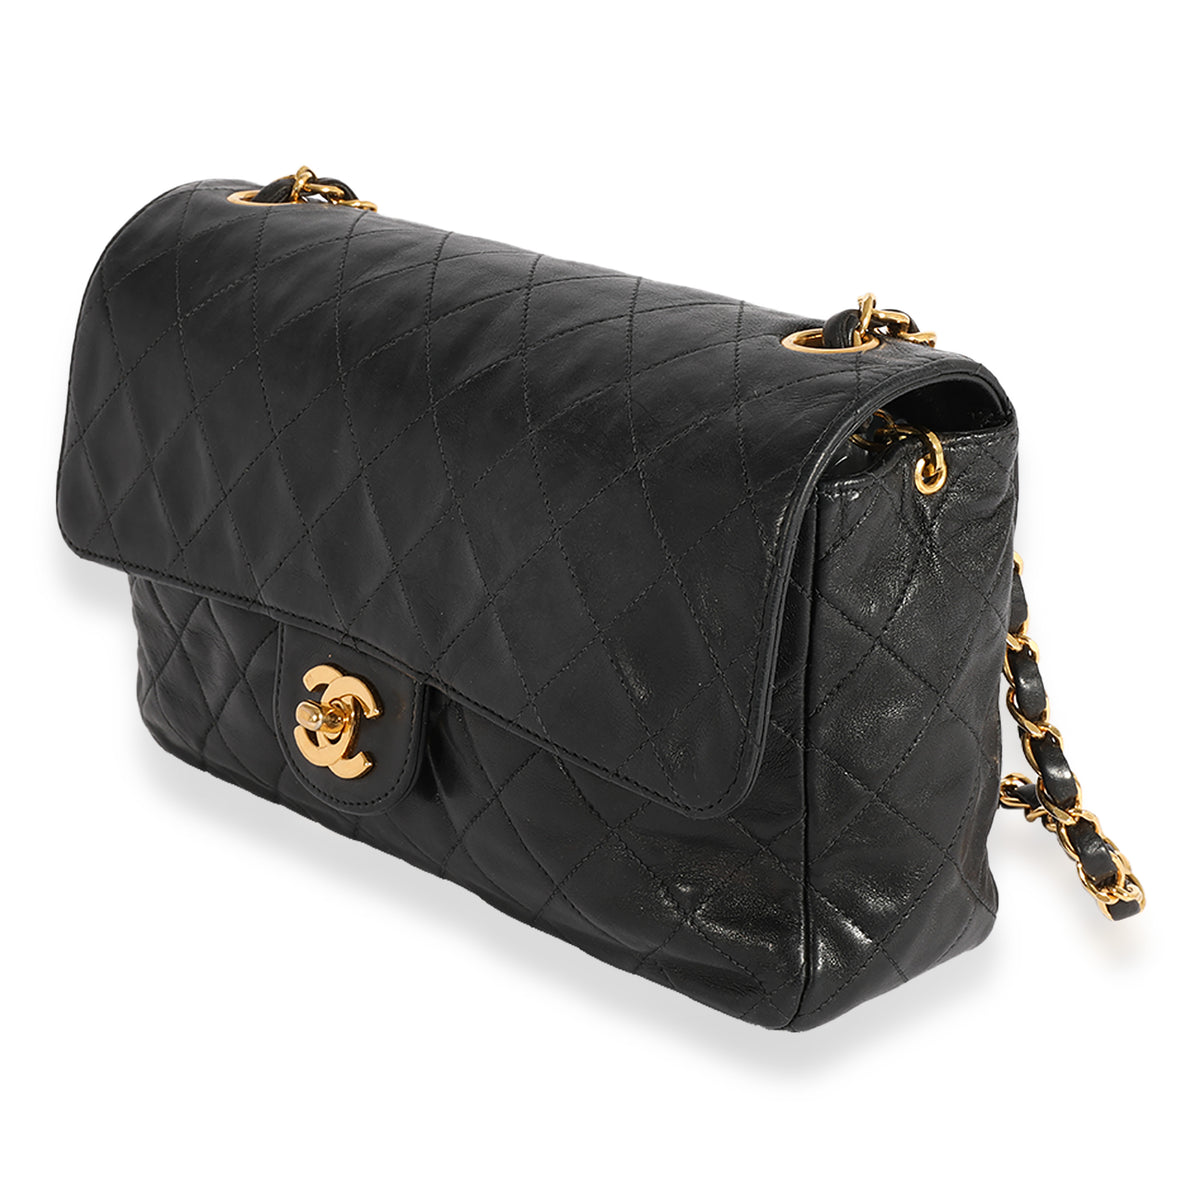 Chanel Vintage Black Quilted Lambskin Medium Classic Double Flap Bag, myGemma